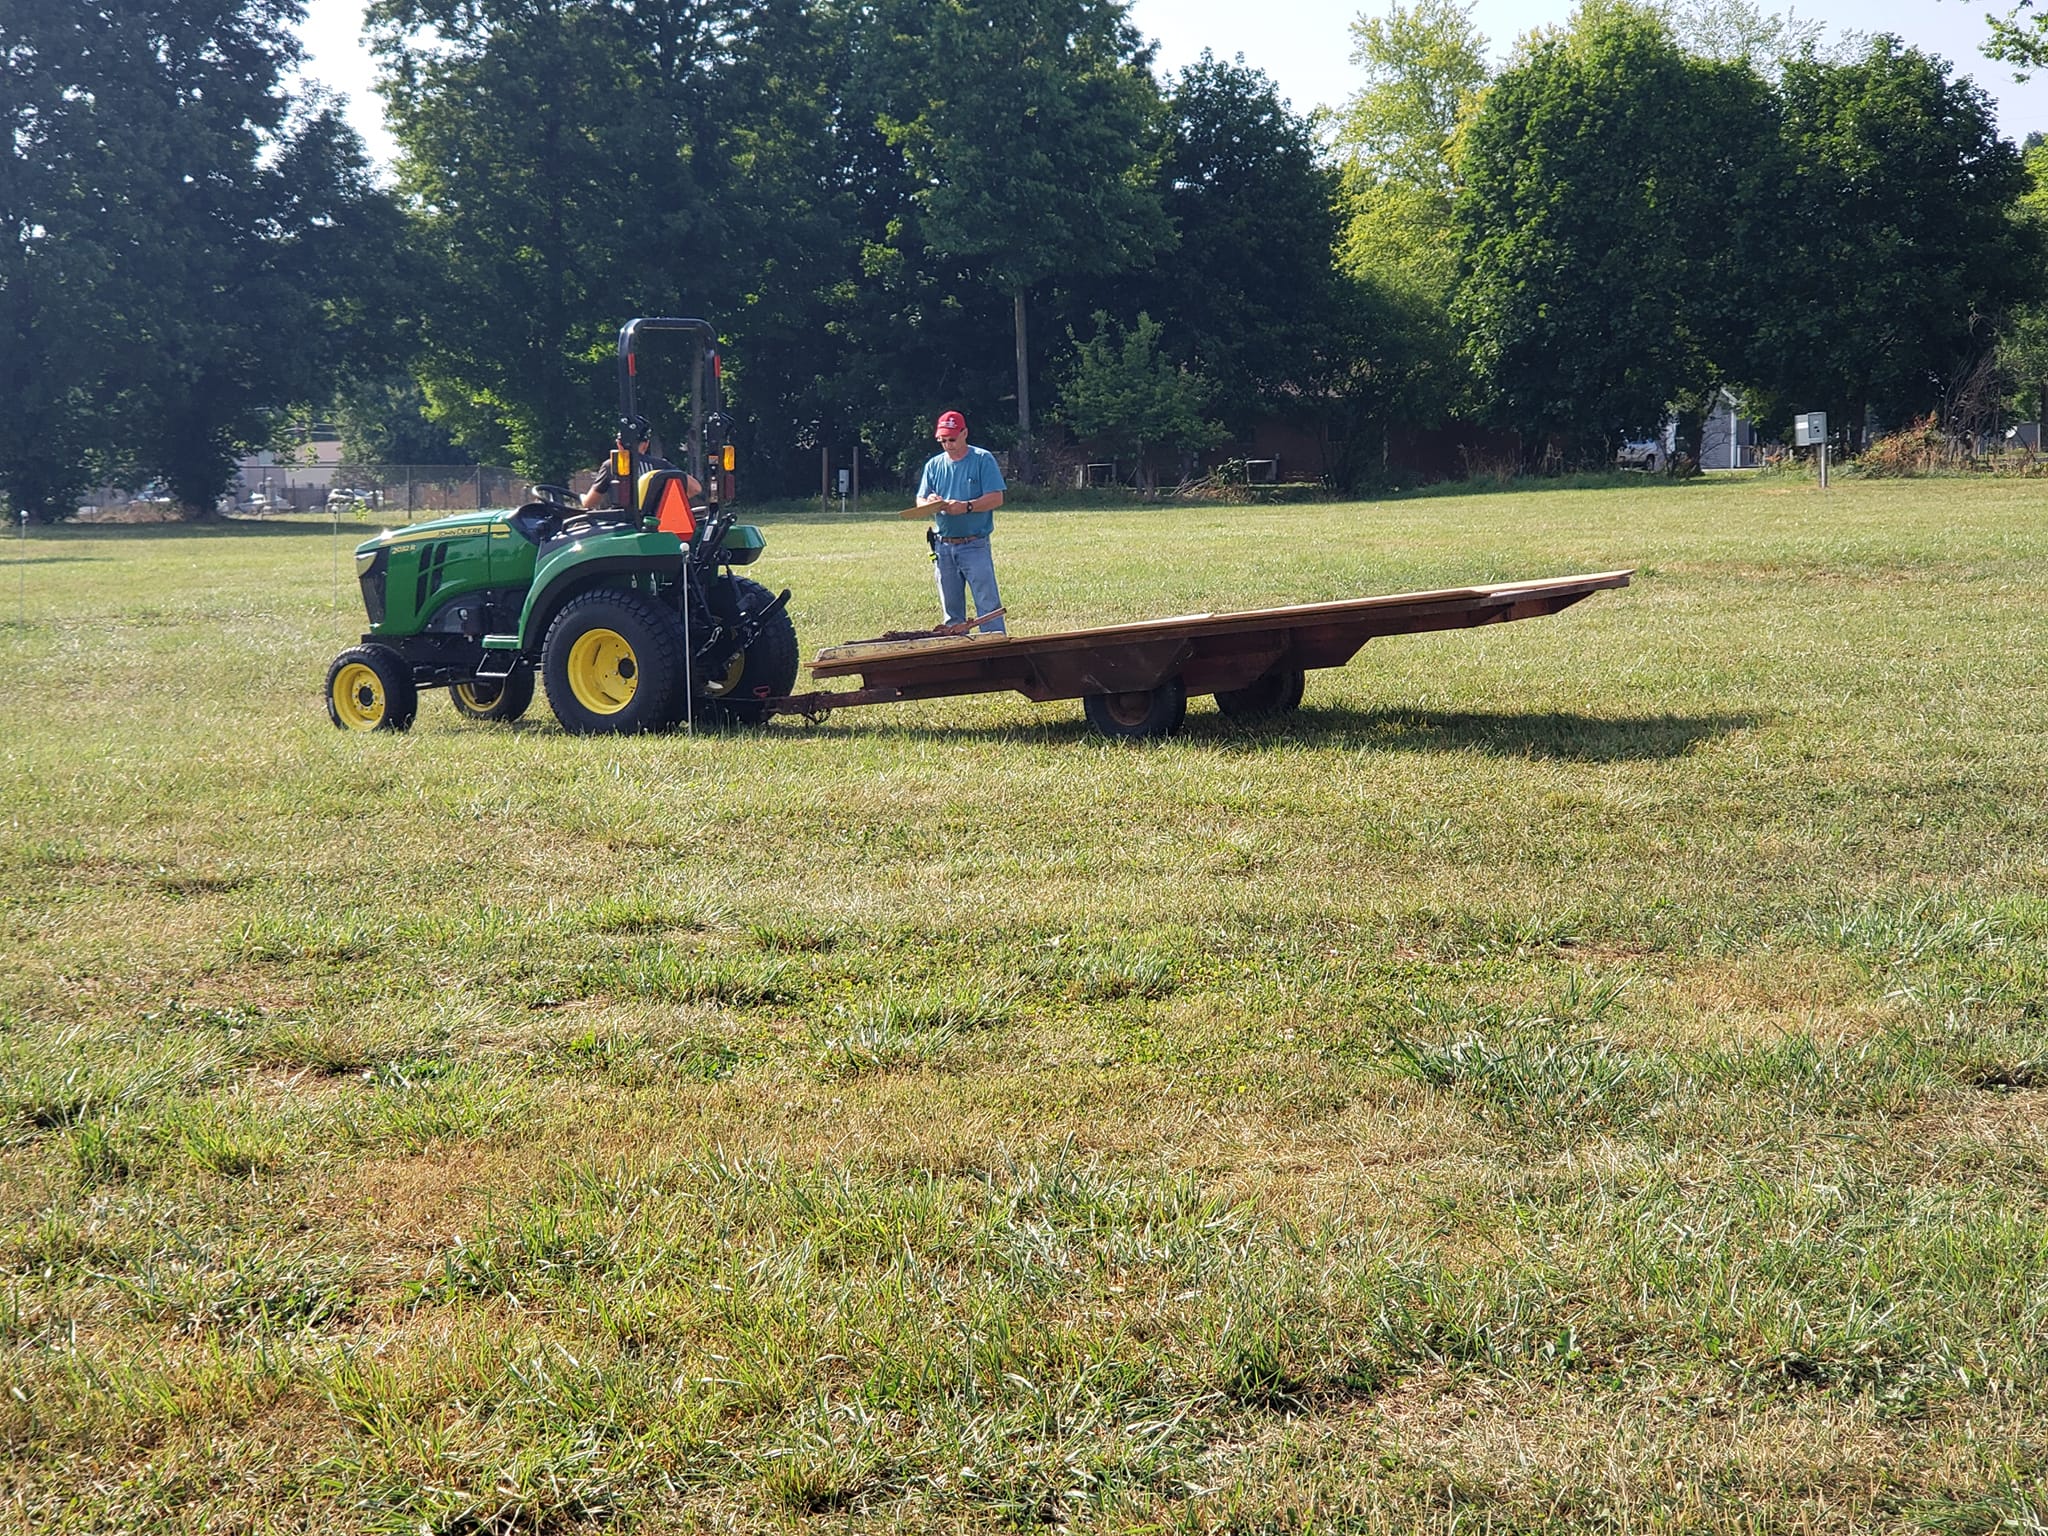 A tractor club member navigating a course with a flat bed trailer attached to John Deere Tractor